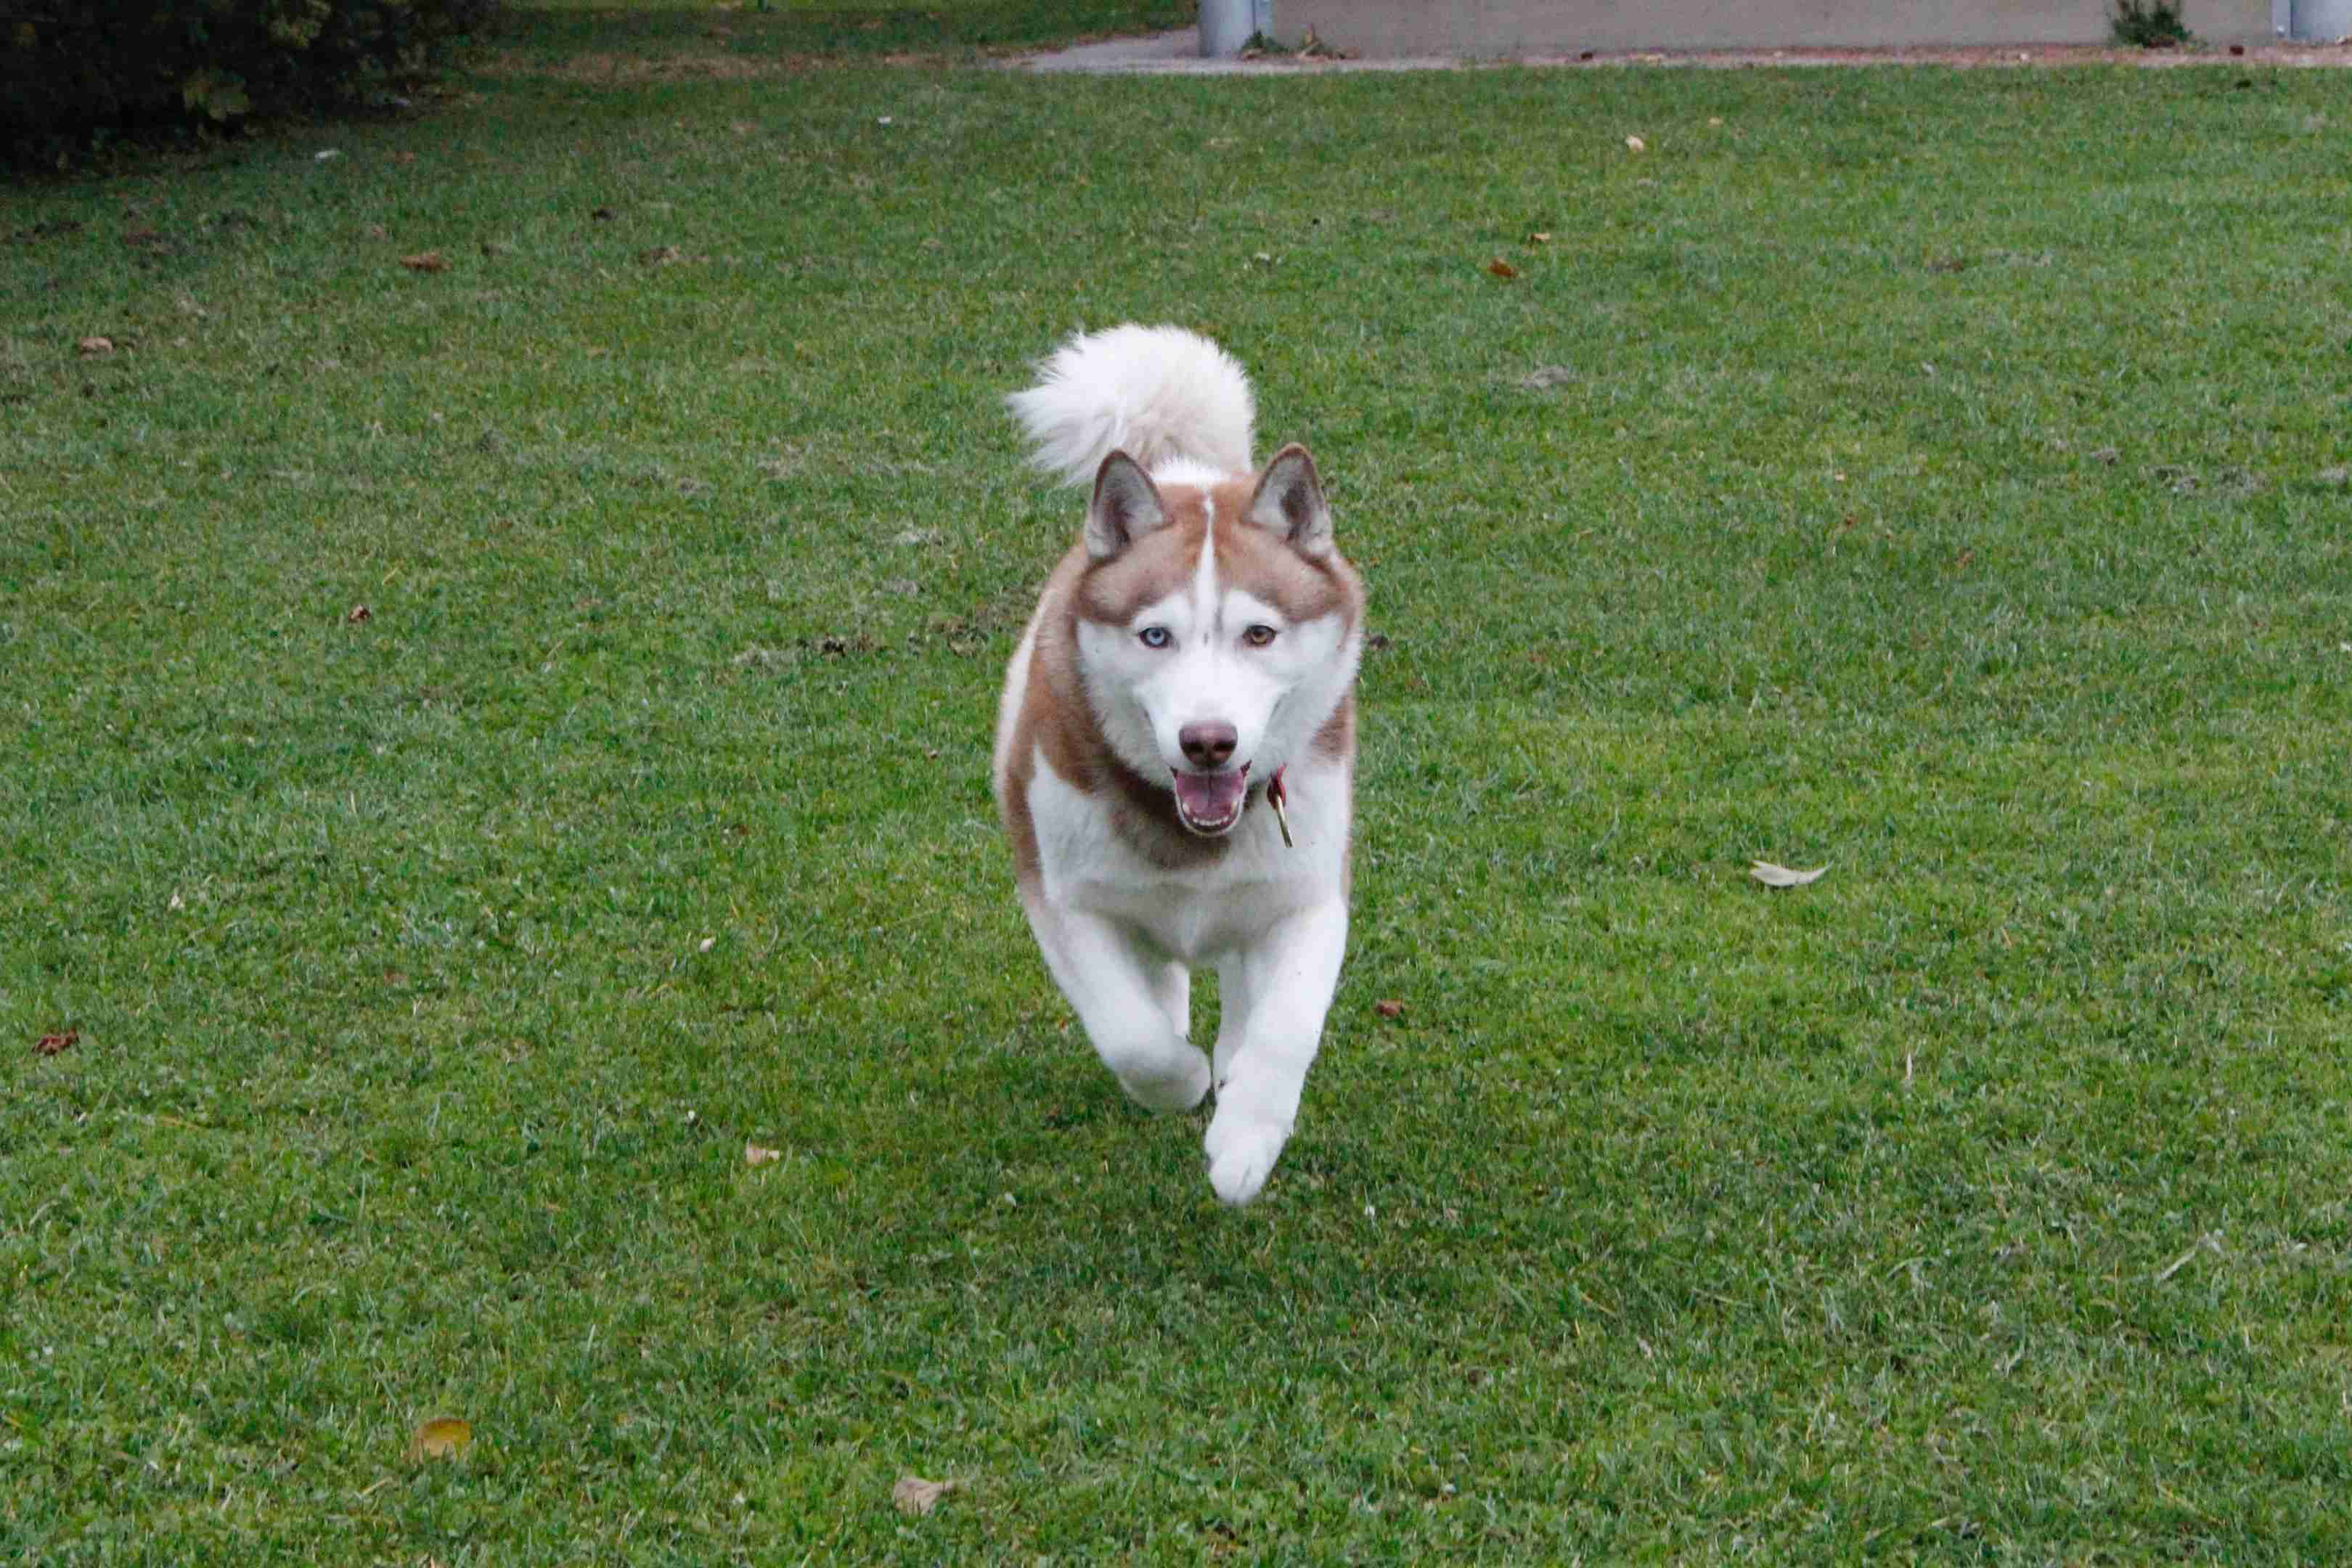 Train Your Alaskan Malamute Like a Pro: How Much Time Should You Devote to Training?